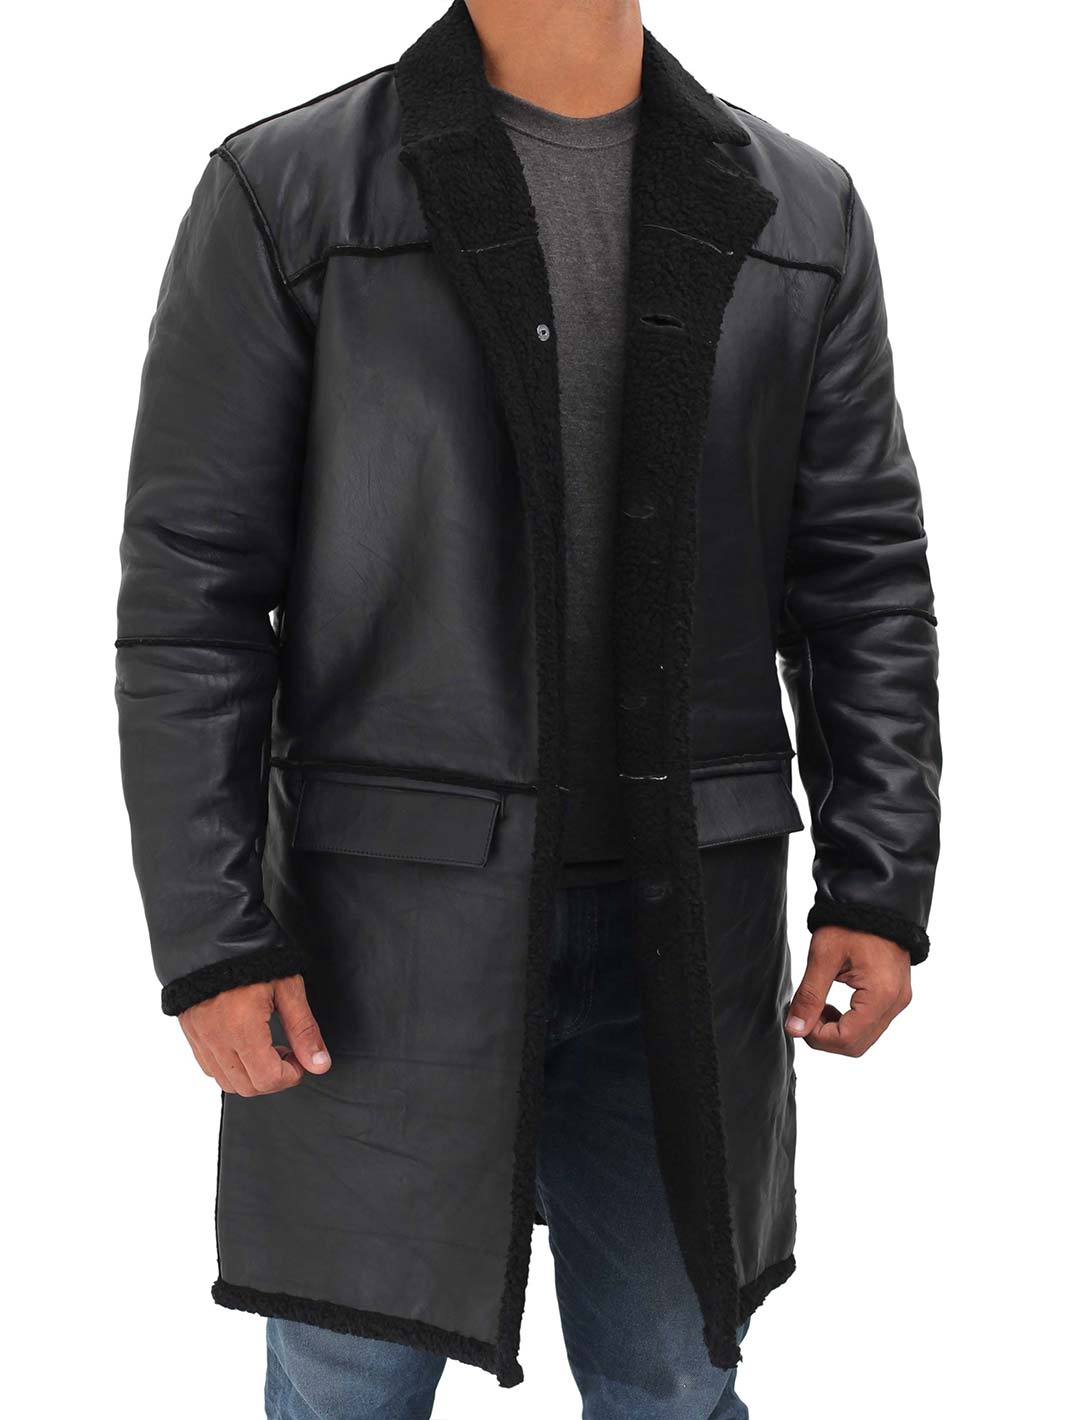 mens shearling leather jacket